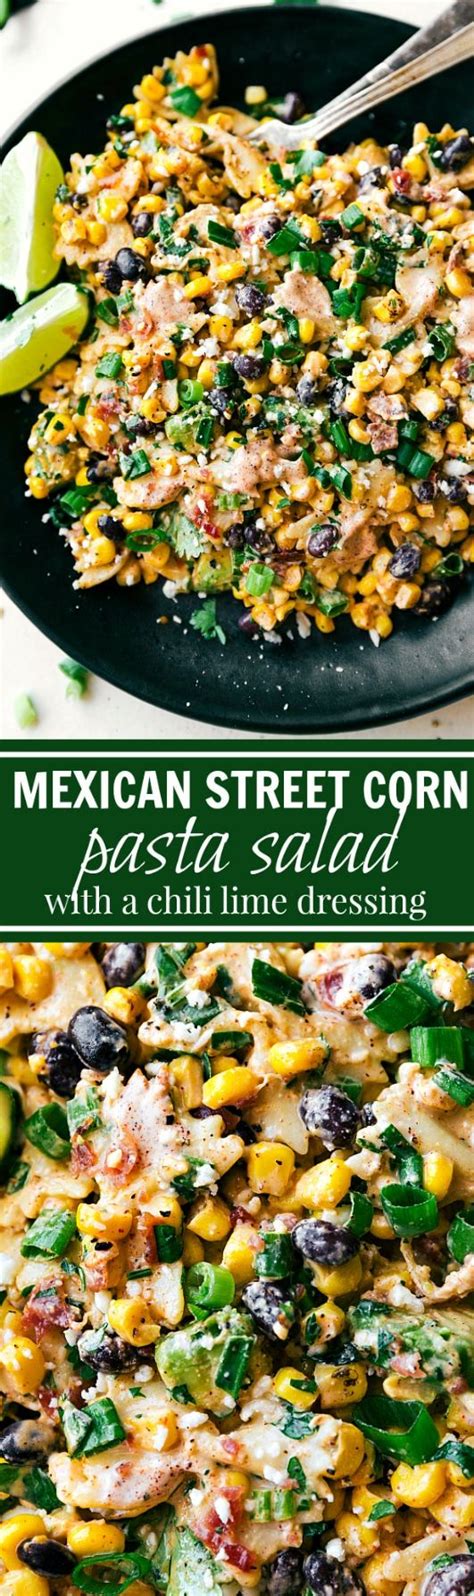 In mexico, street vendors sell corn on the cob from carts like vendors in the u.s. A delicious MEXICAN STREET CORN Pasta salad with tons of veggies, bacon, and a simple creamy ...